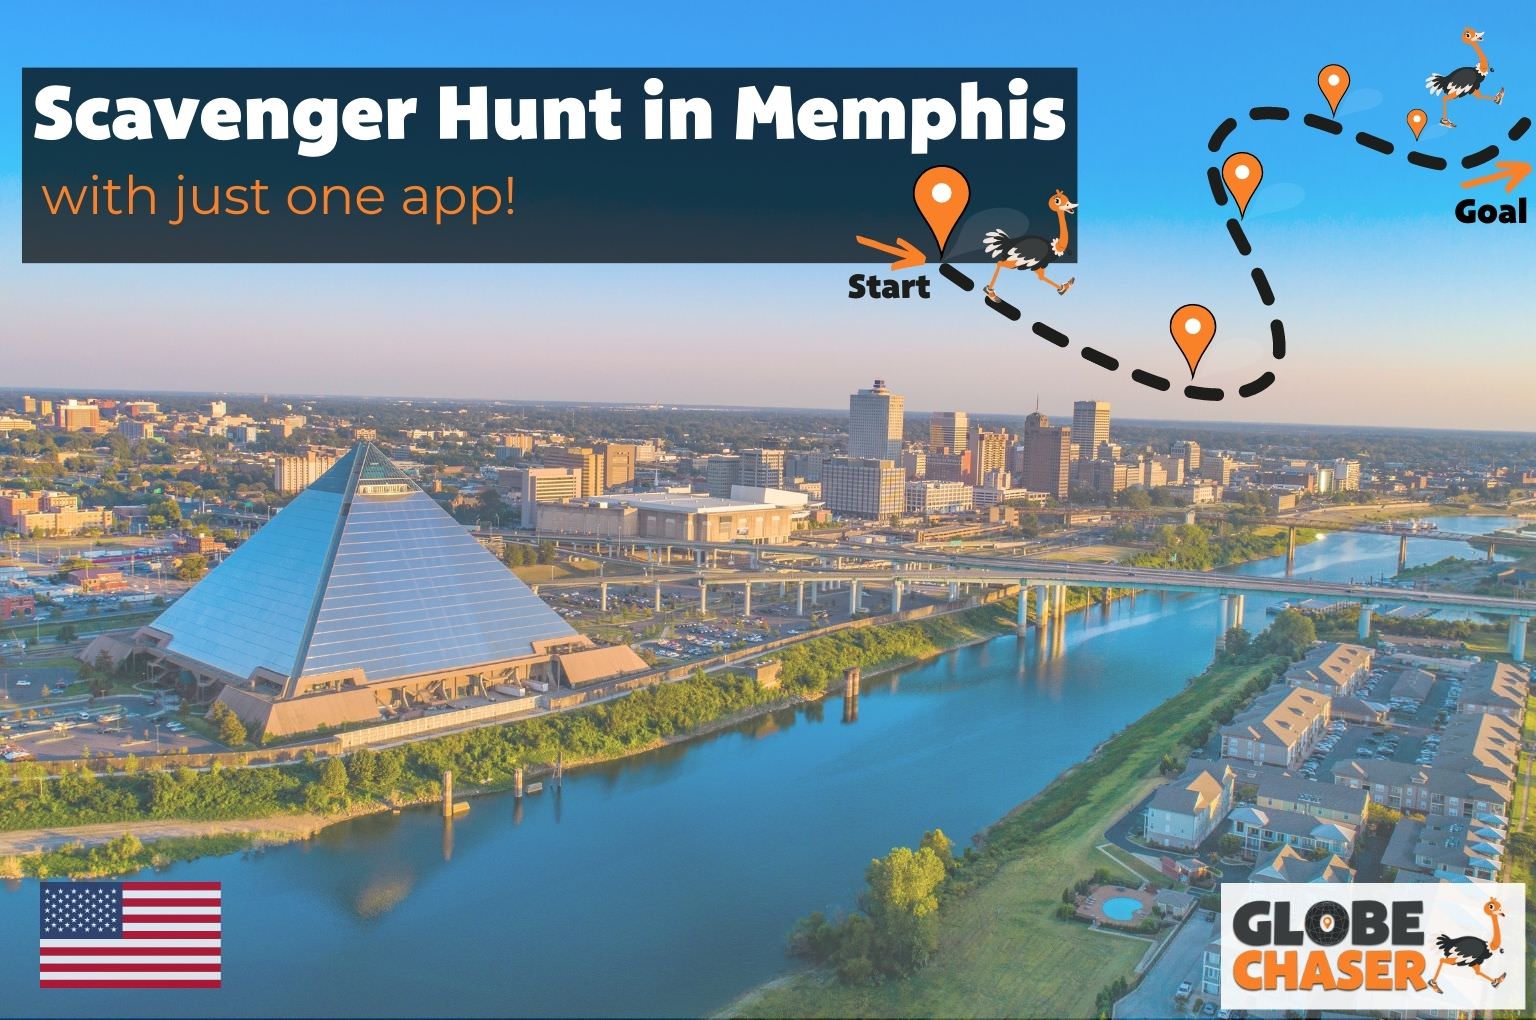 Scavenger Hunt in Memphis, USA - Family Activities with the Globe Chaser App for Outdoor Fun